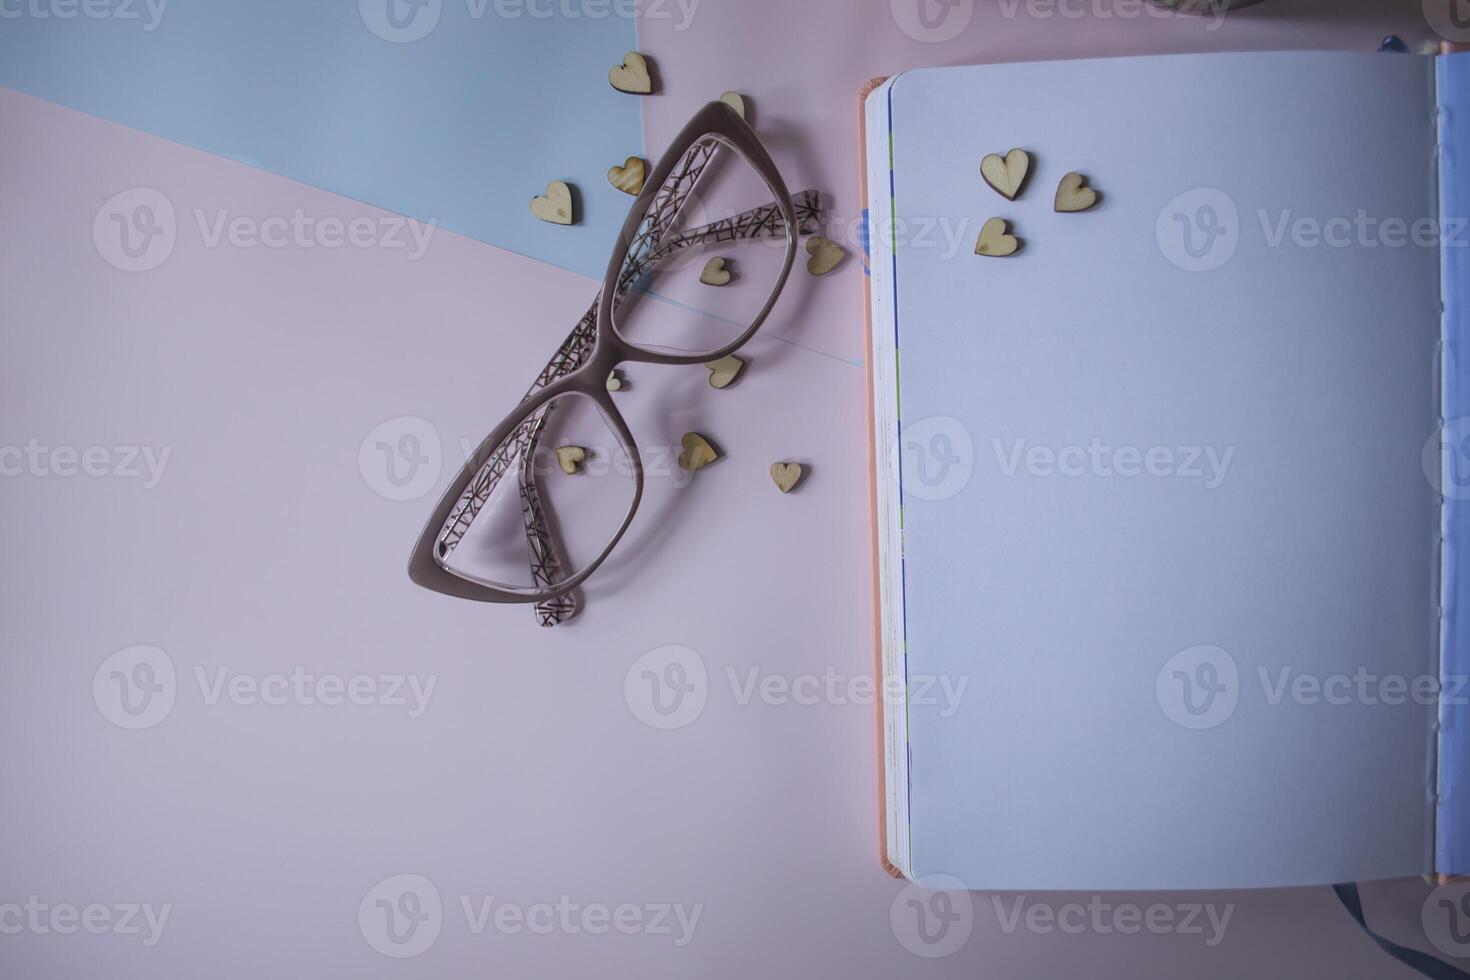 Eye glasses and opened notebook on a table. photo